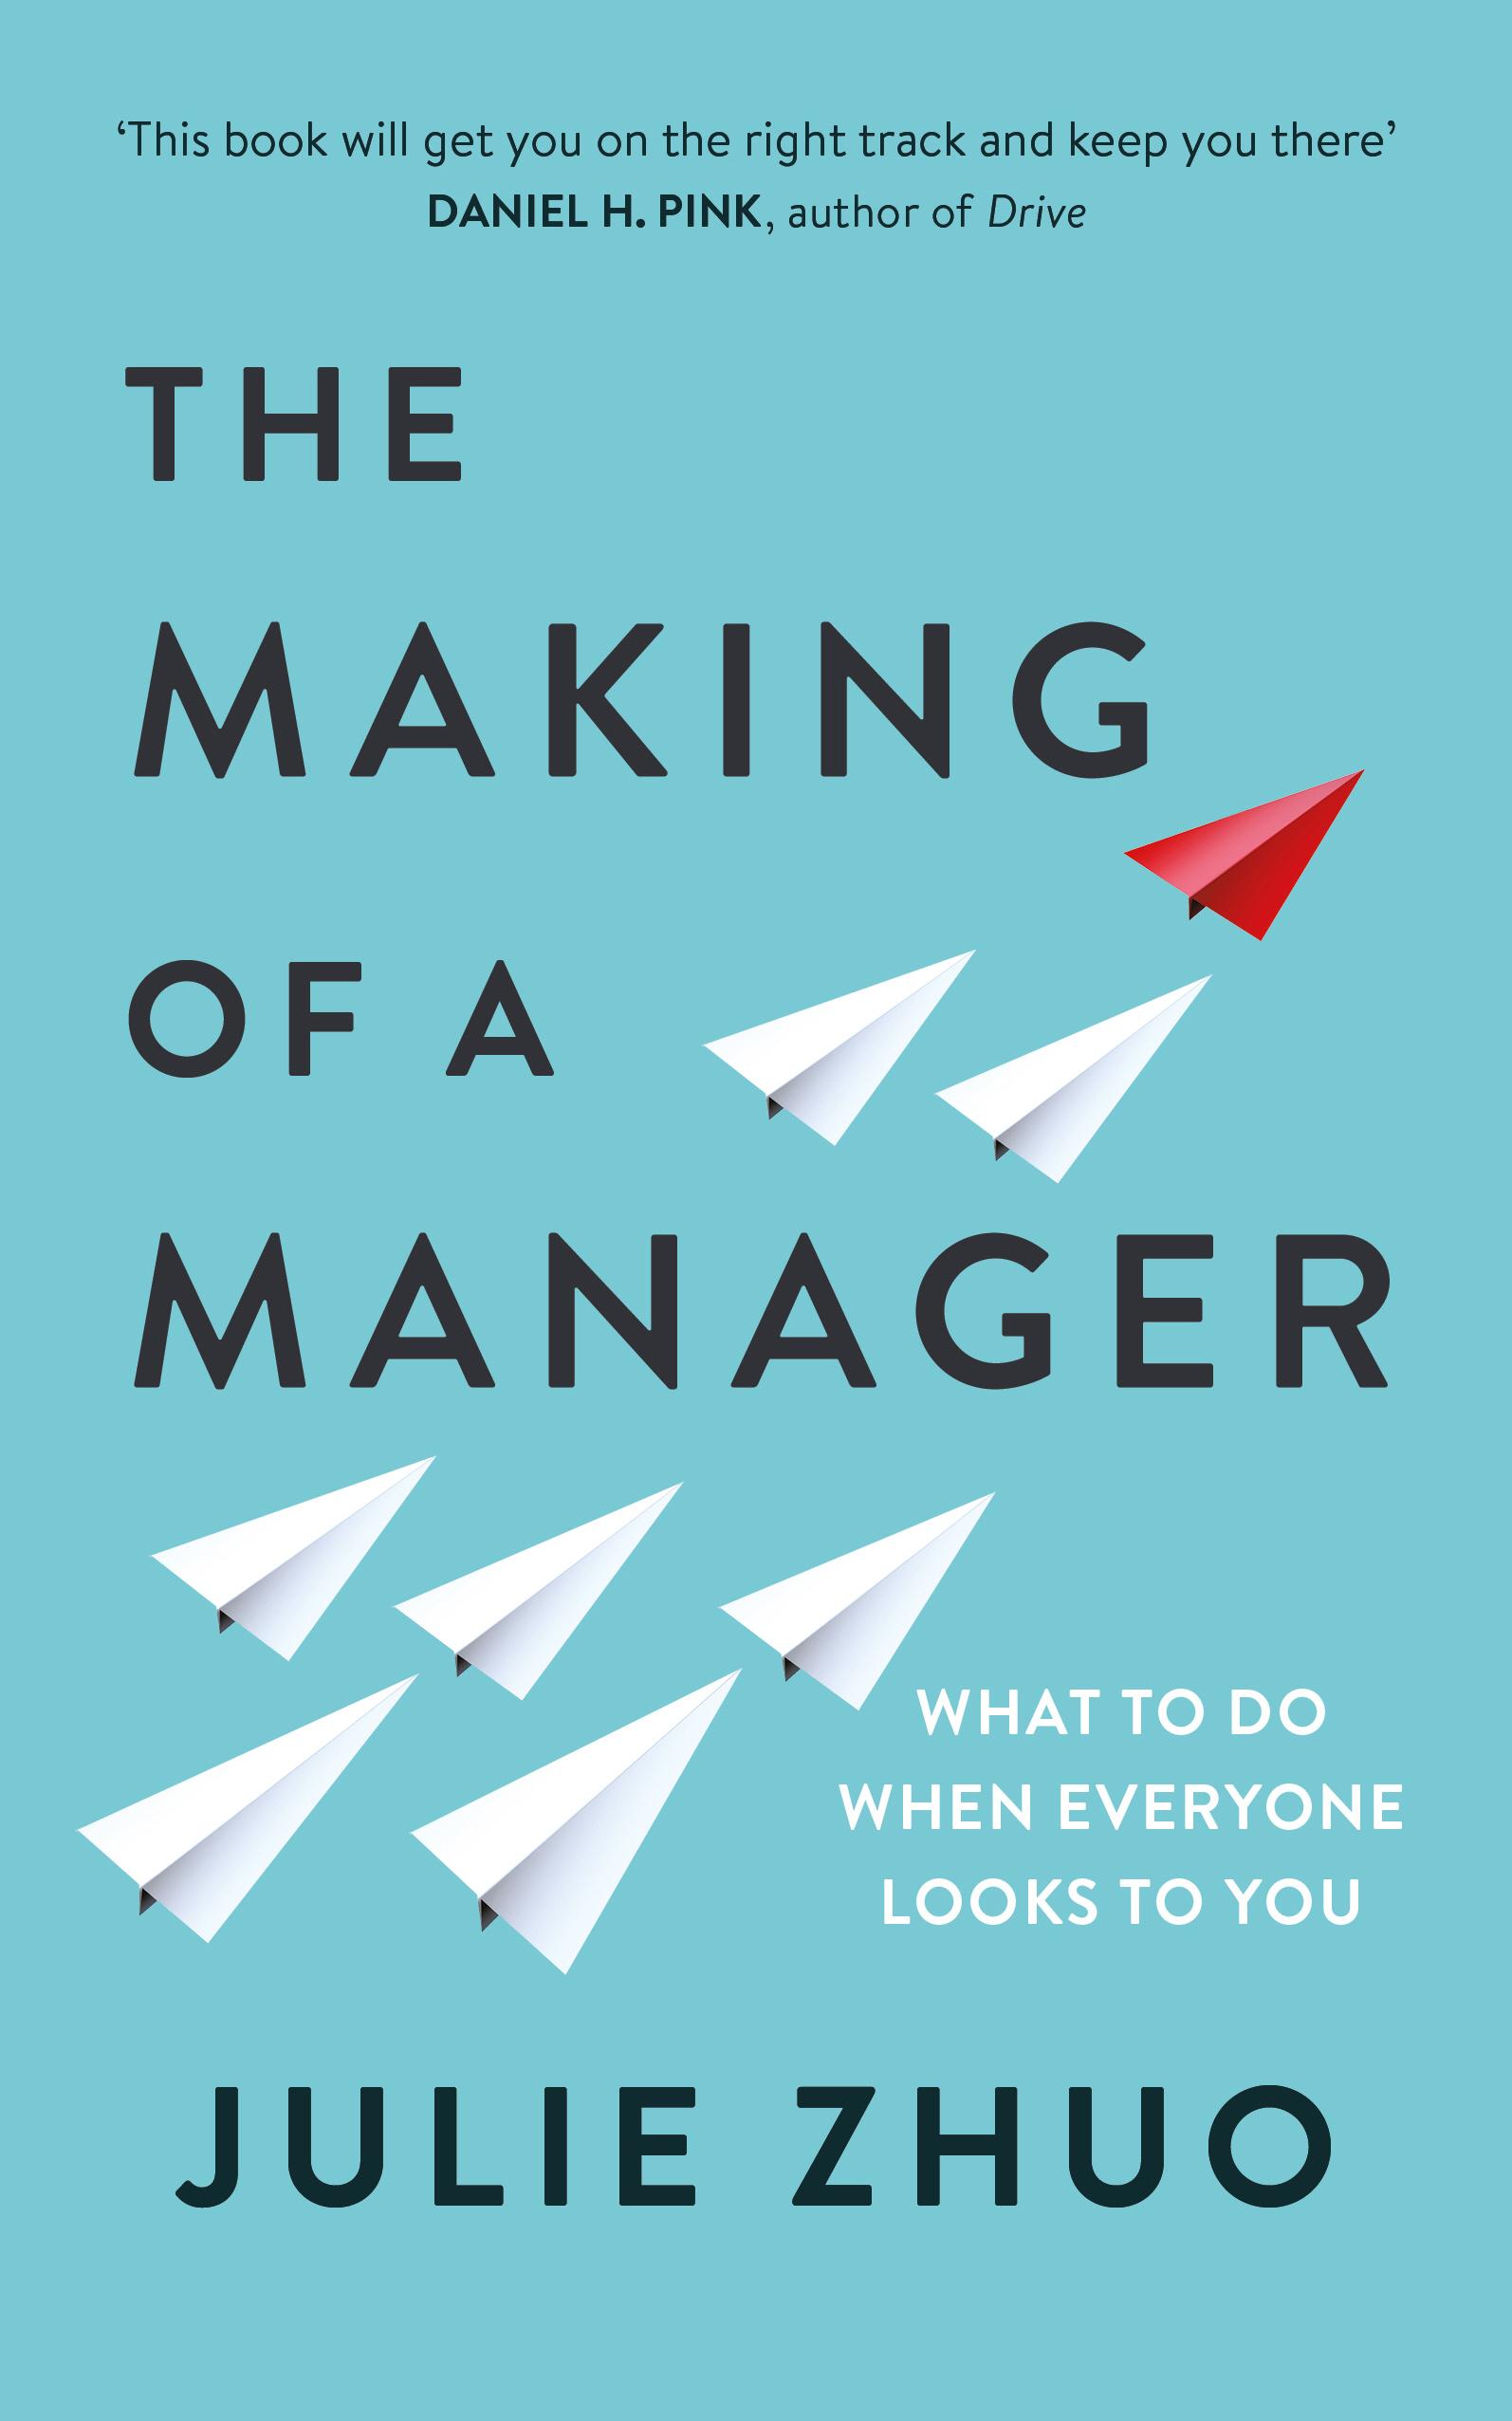 The Making of a Manager: What to Do When Everyone Looks to You - Julie Zhuo